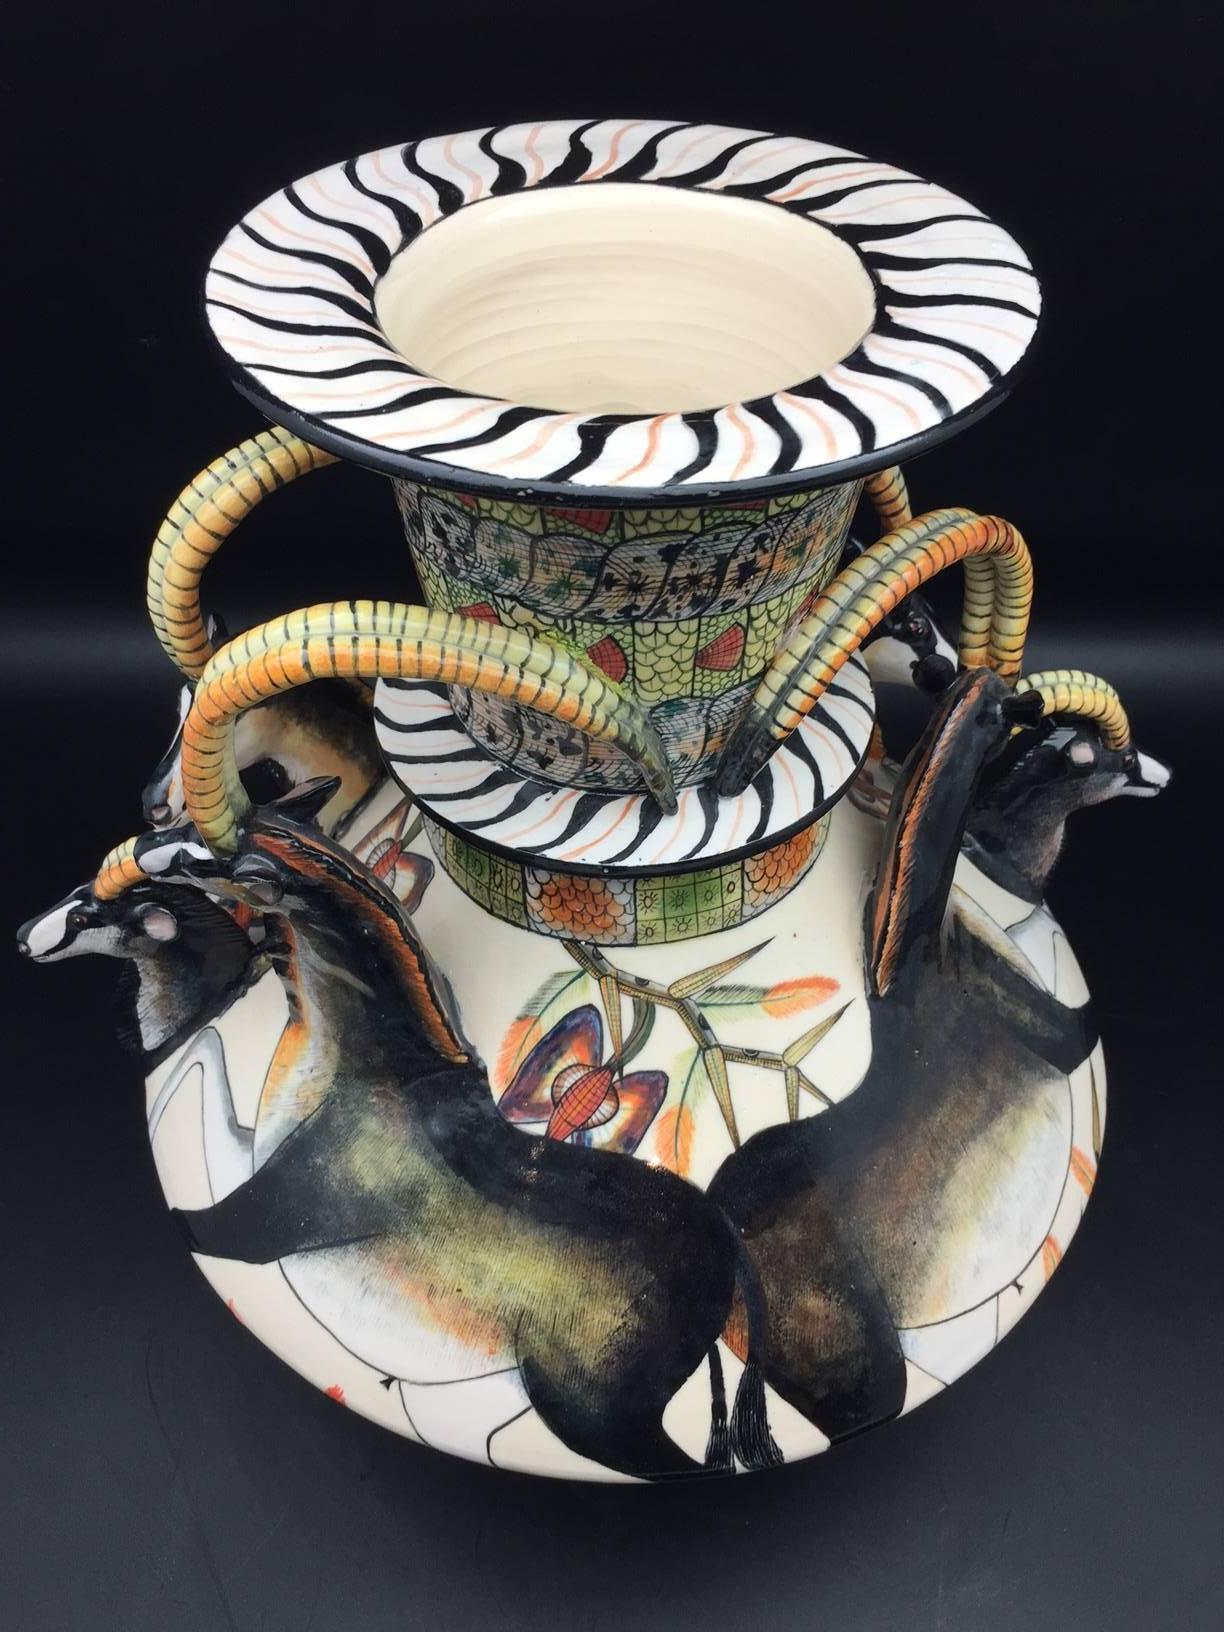 Hand-Crafted Sable Vase, Ceramic Sculpture by Ardmore from South Africa